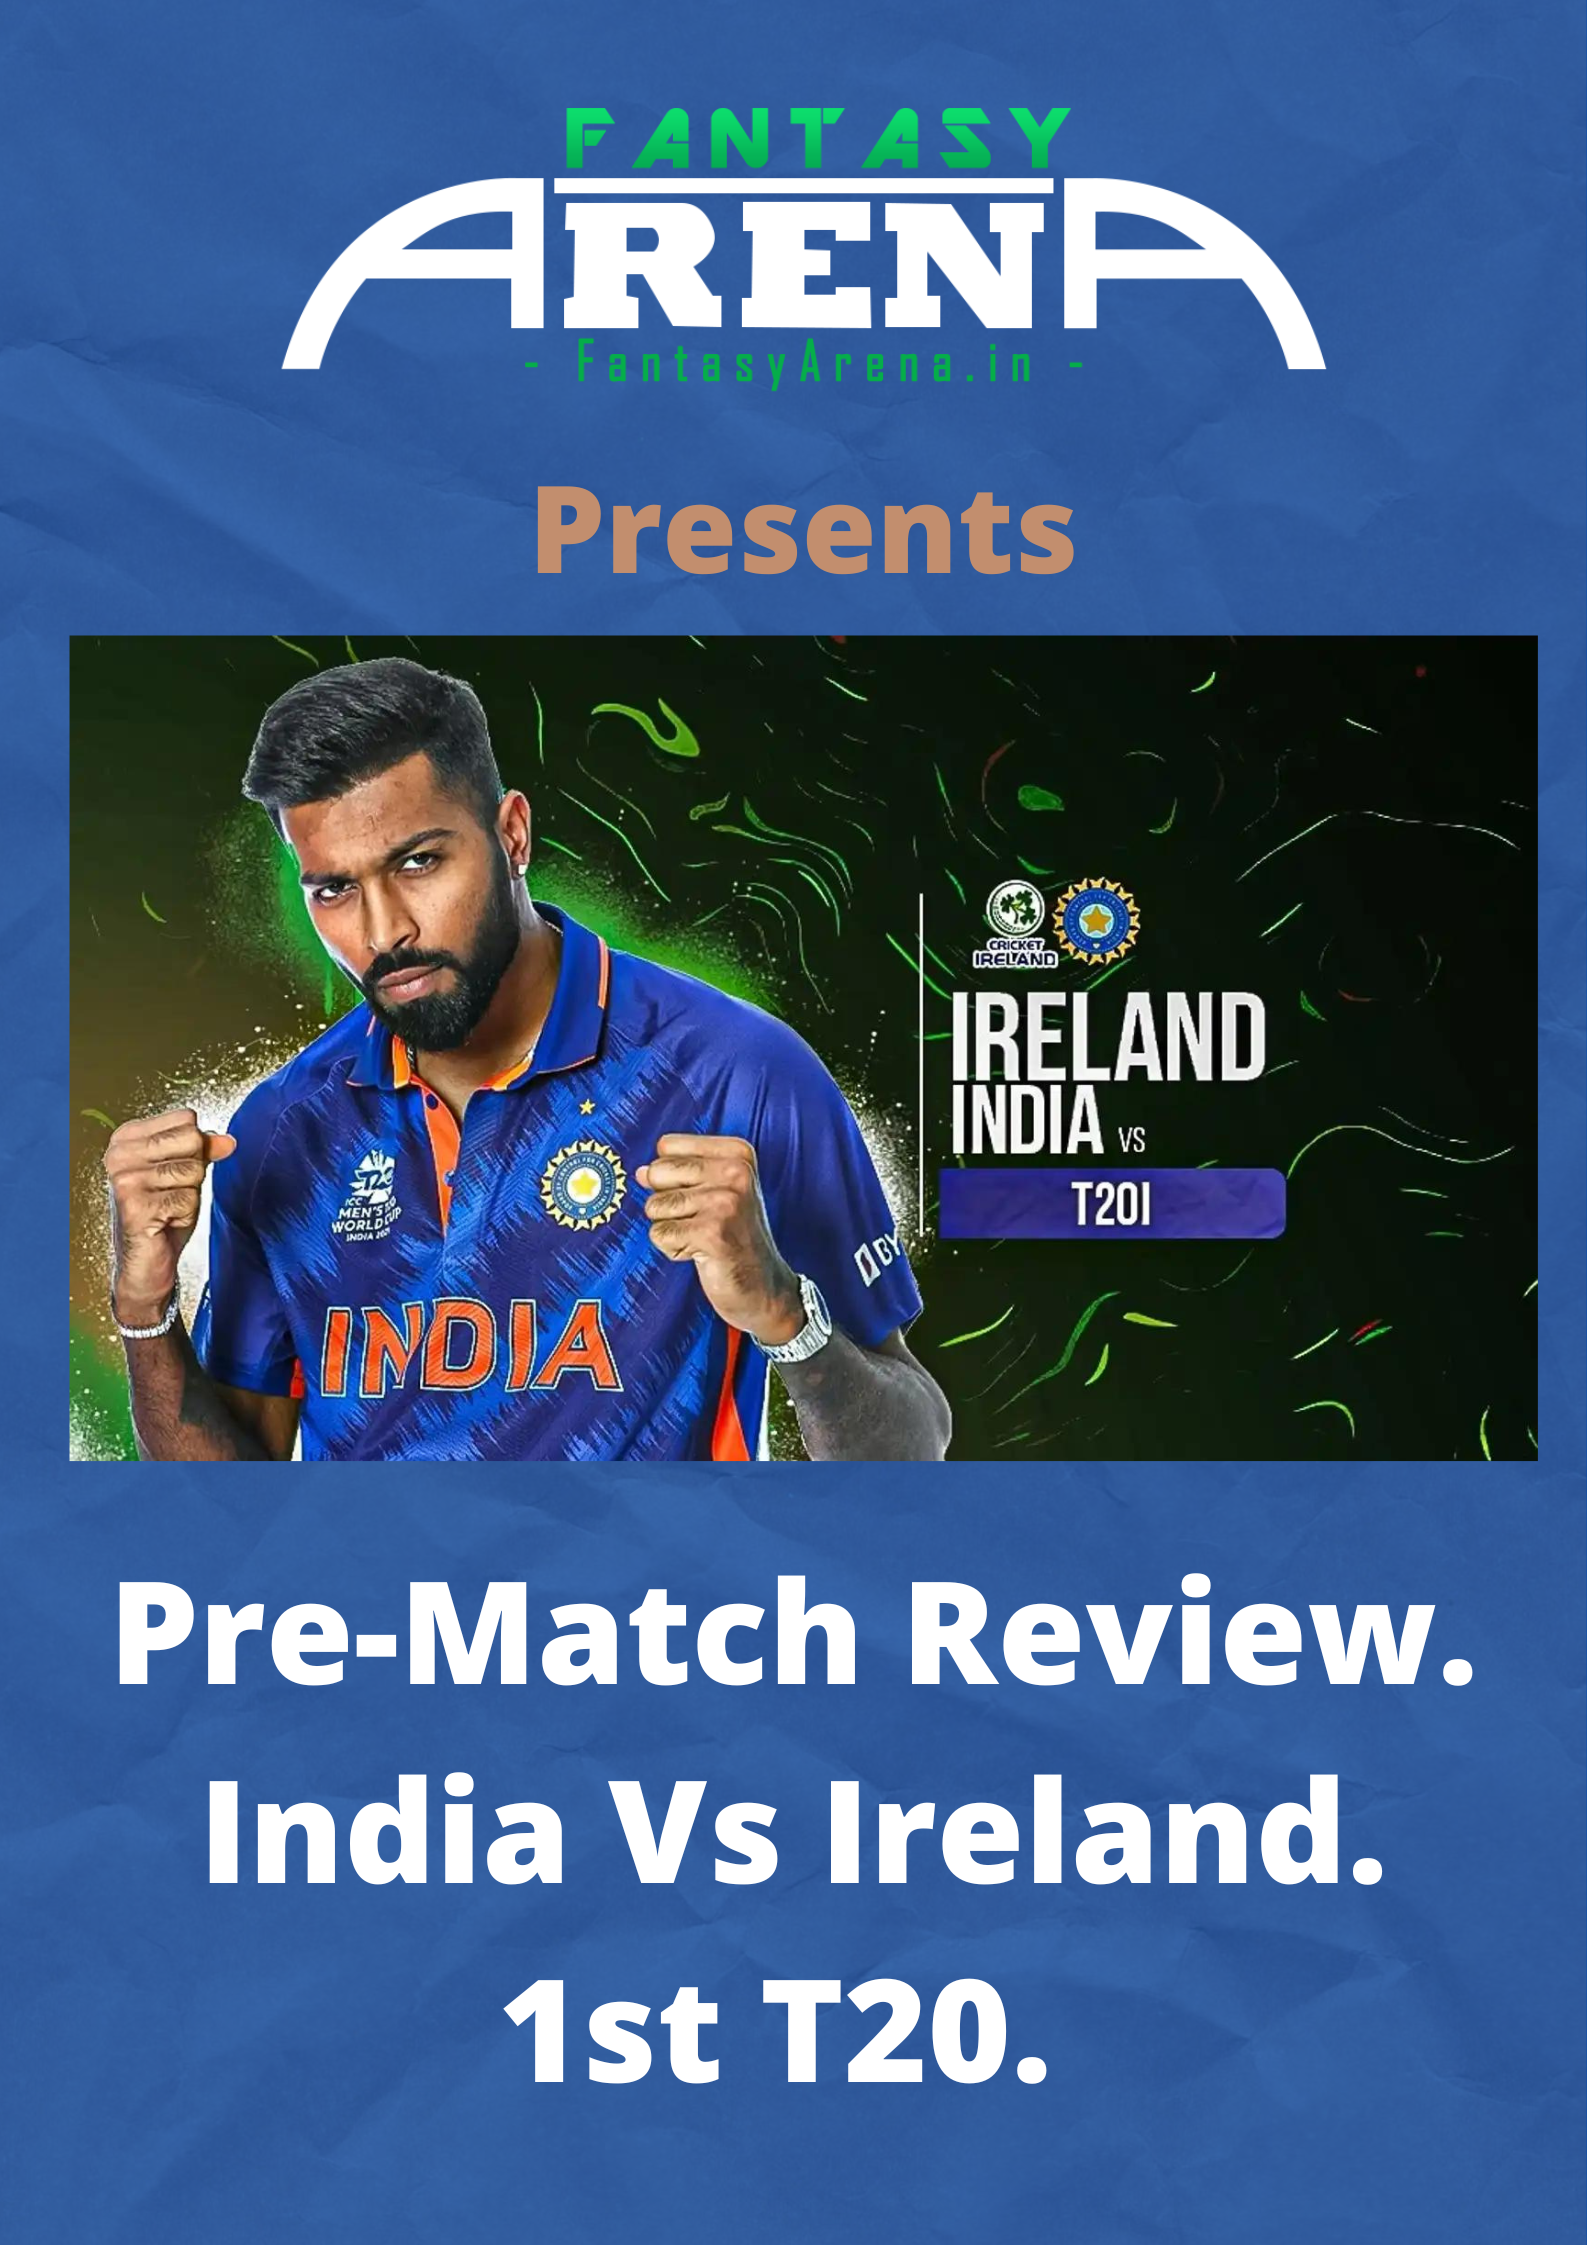 India vs Ireland. 1st T20. Preview.